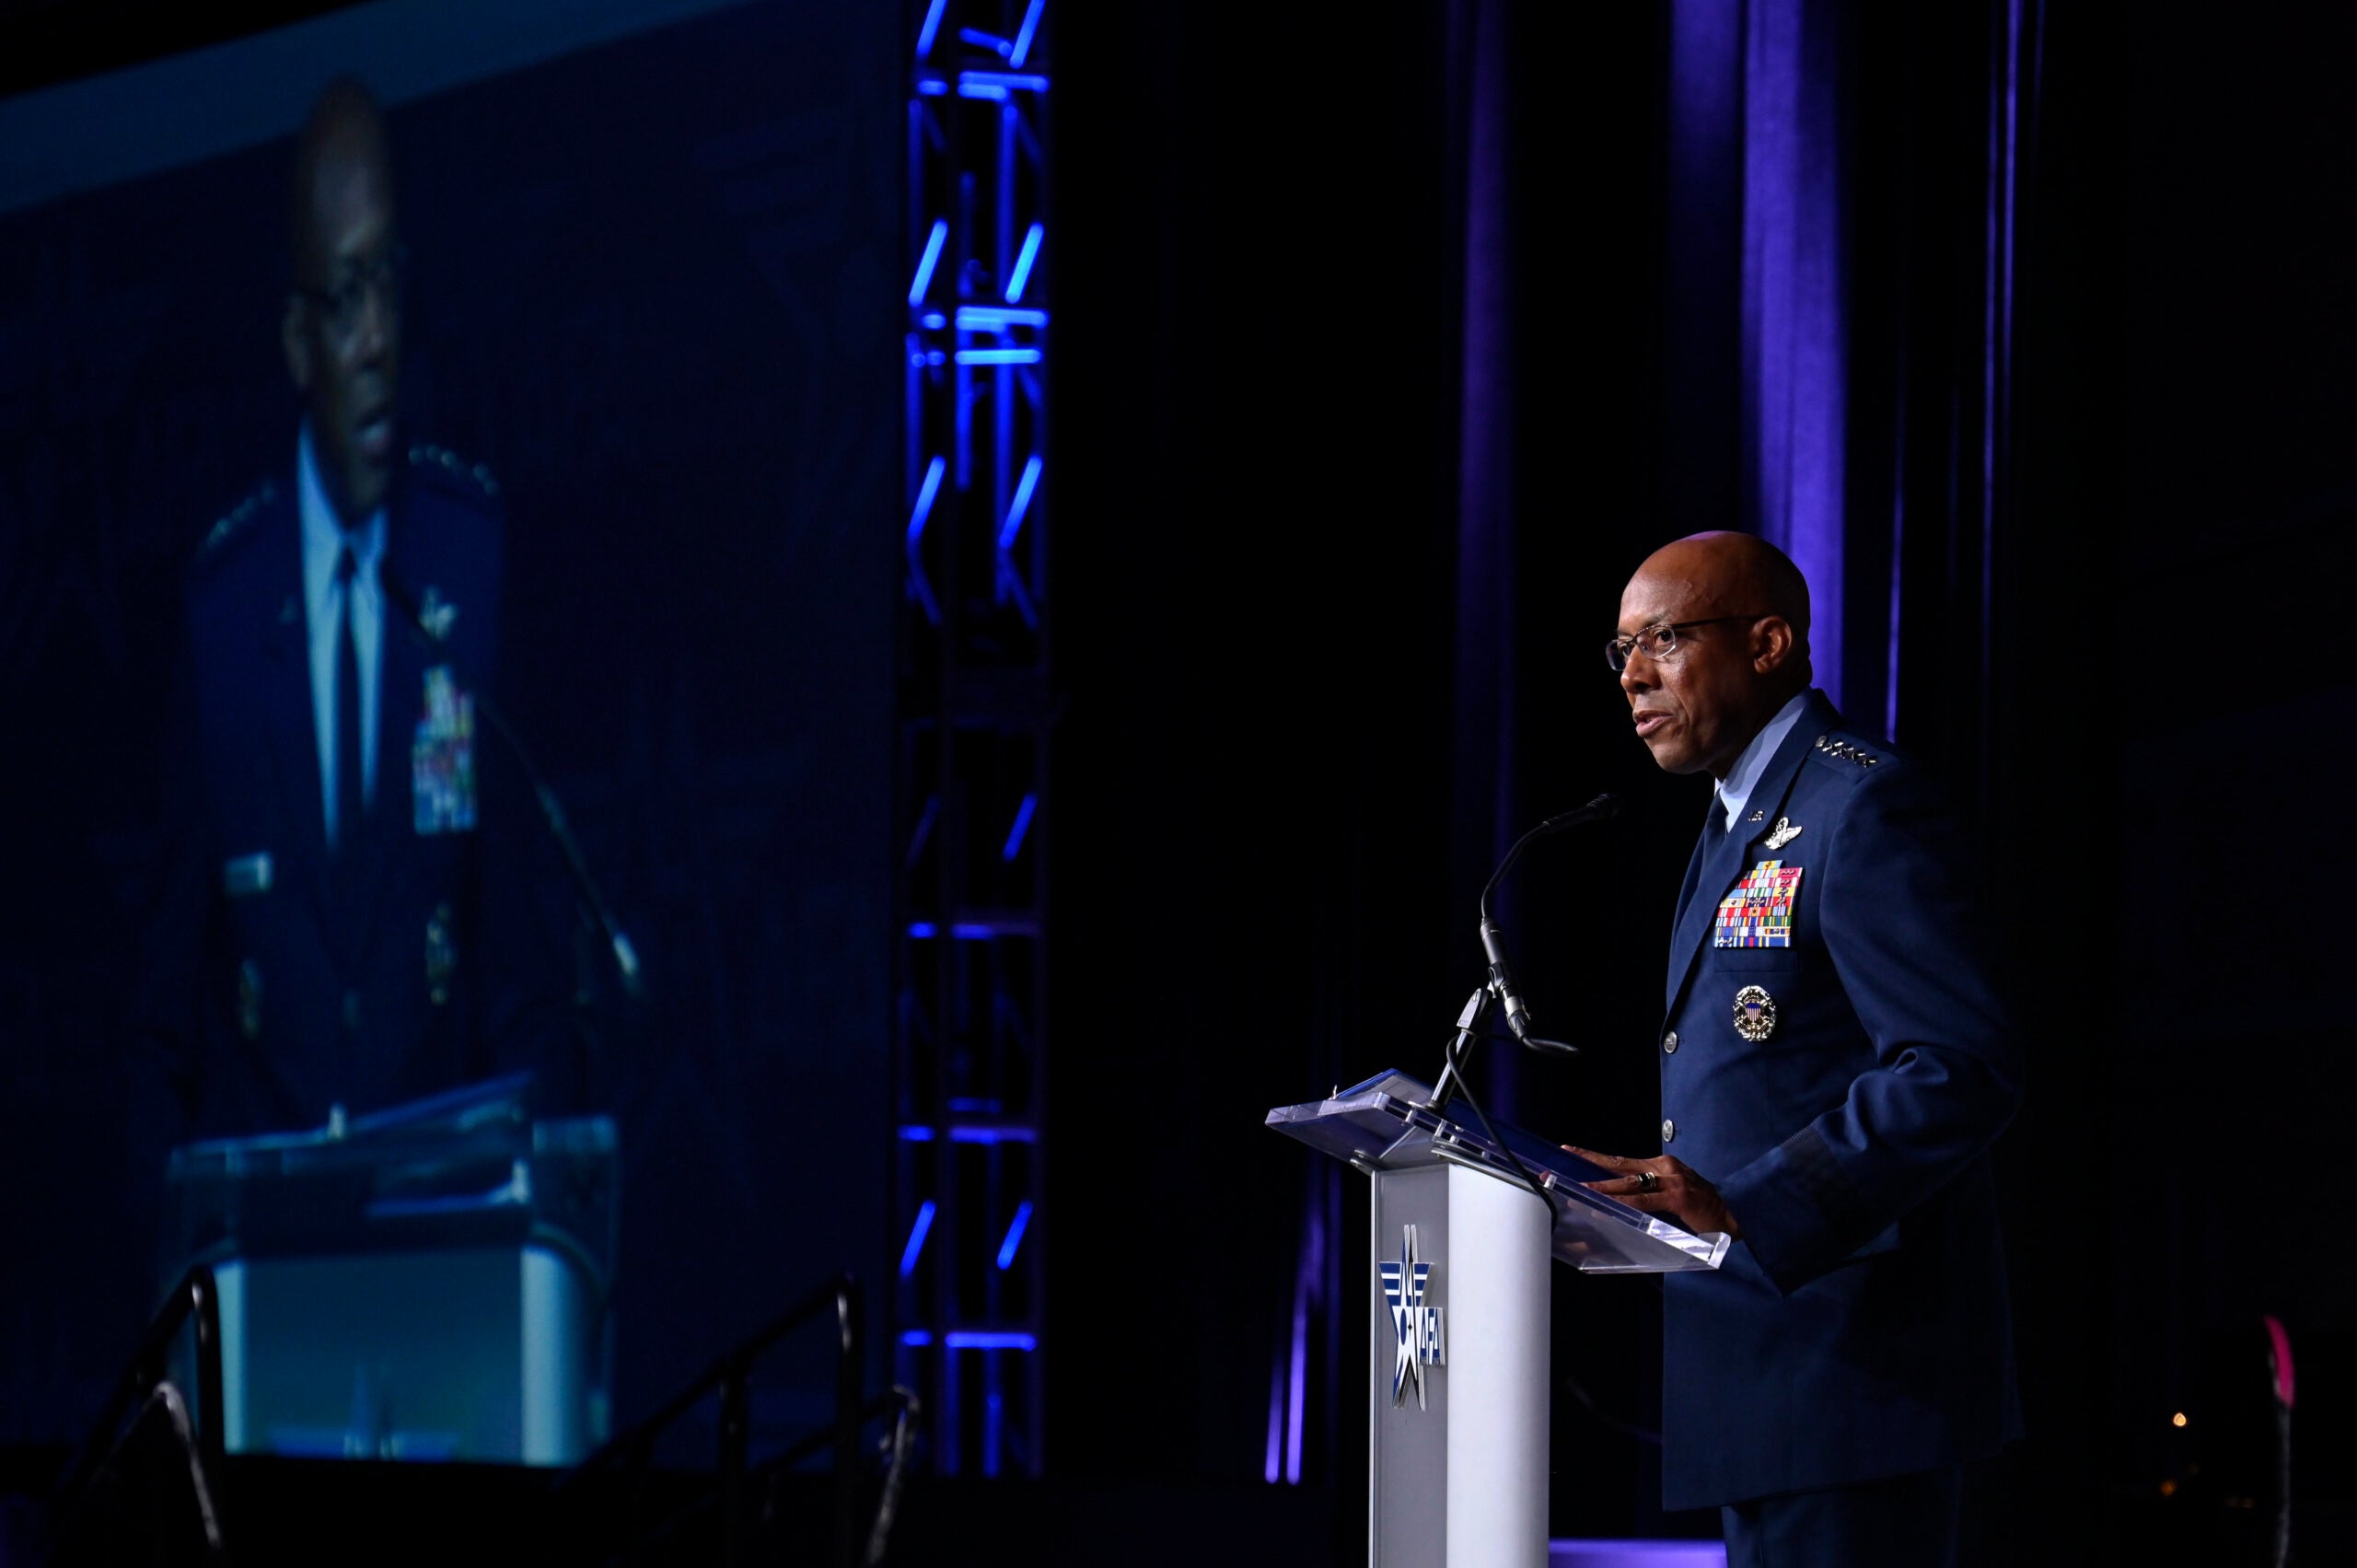 Air Force Chief of Staff Gen. CQ Brown, Jr. delivers a keynote address on the state of the Air Force during the 2022 Air, Space and Cyber Conference in National Harbor, Md., Sept. 19, 2022. (U.S. Air Force photo by Eric Dietrich)